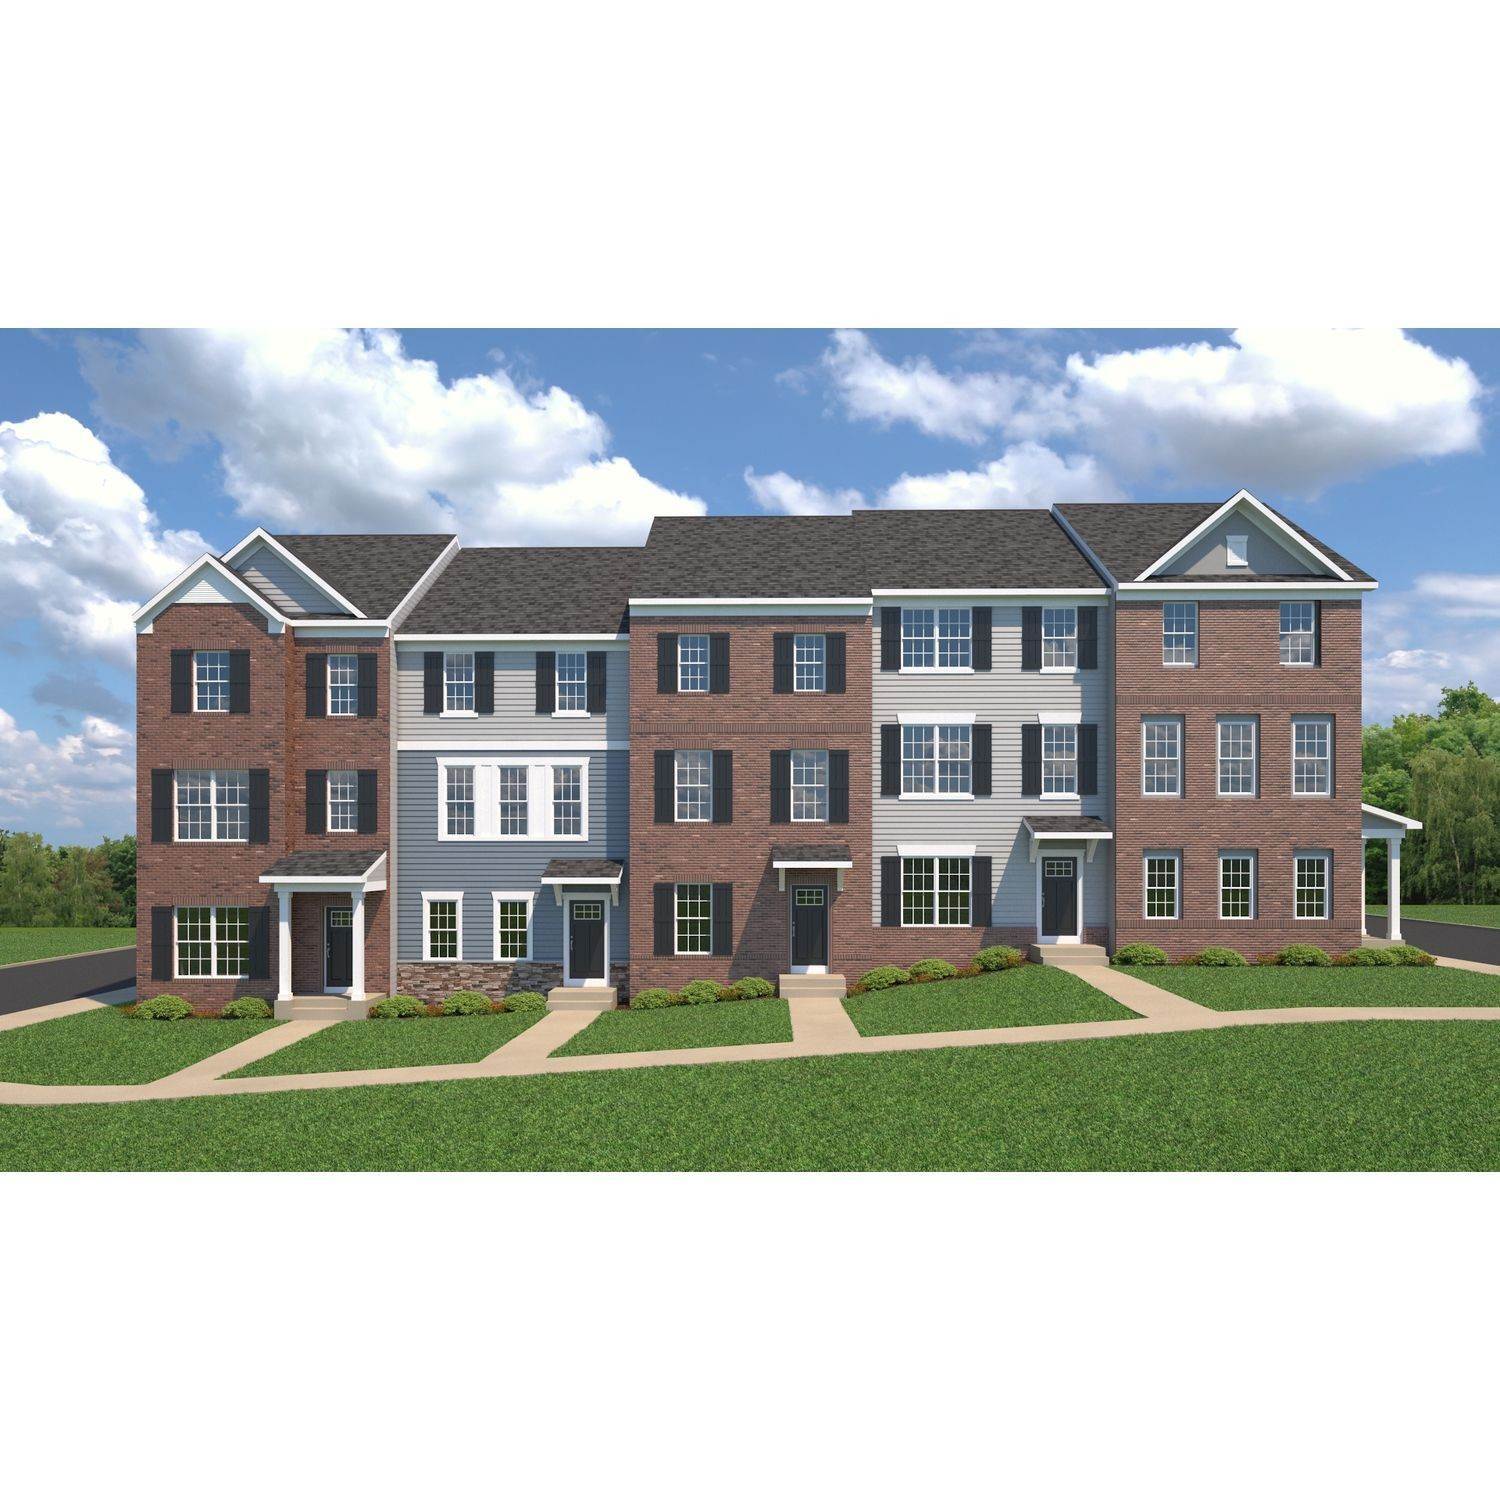 Townhouse for Sale at Clinton, MD 20735